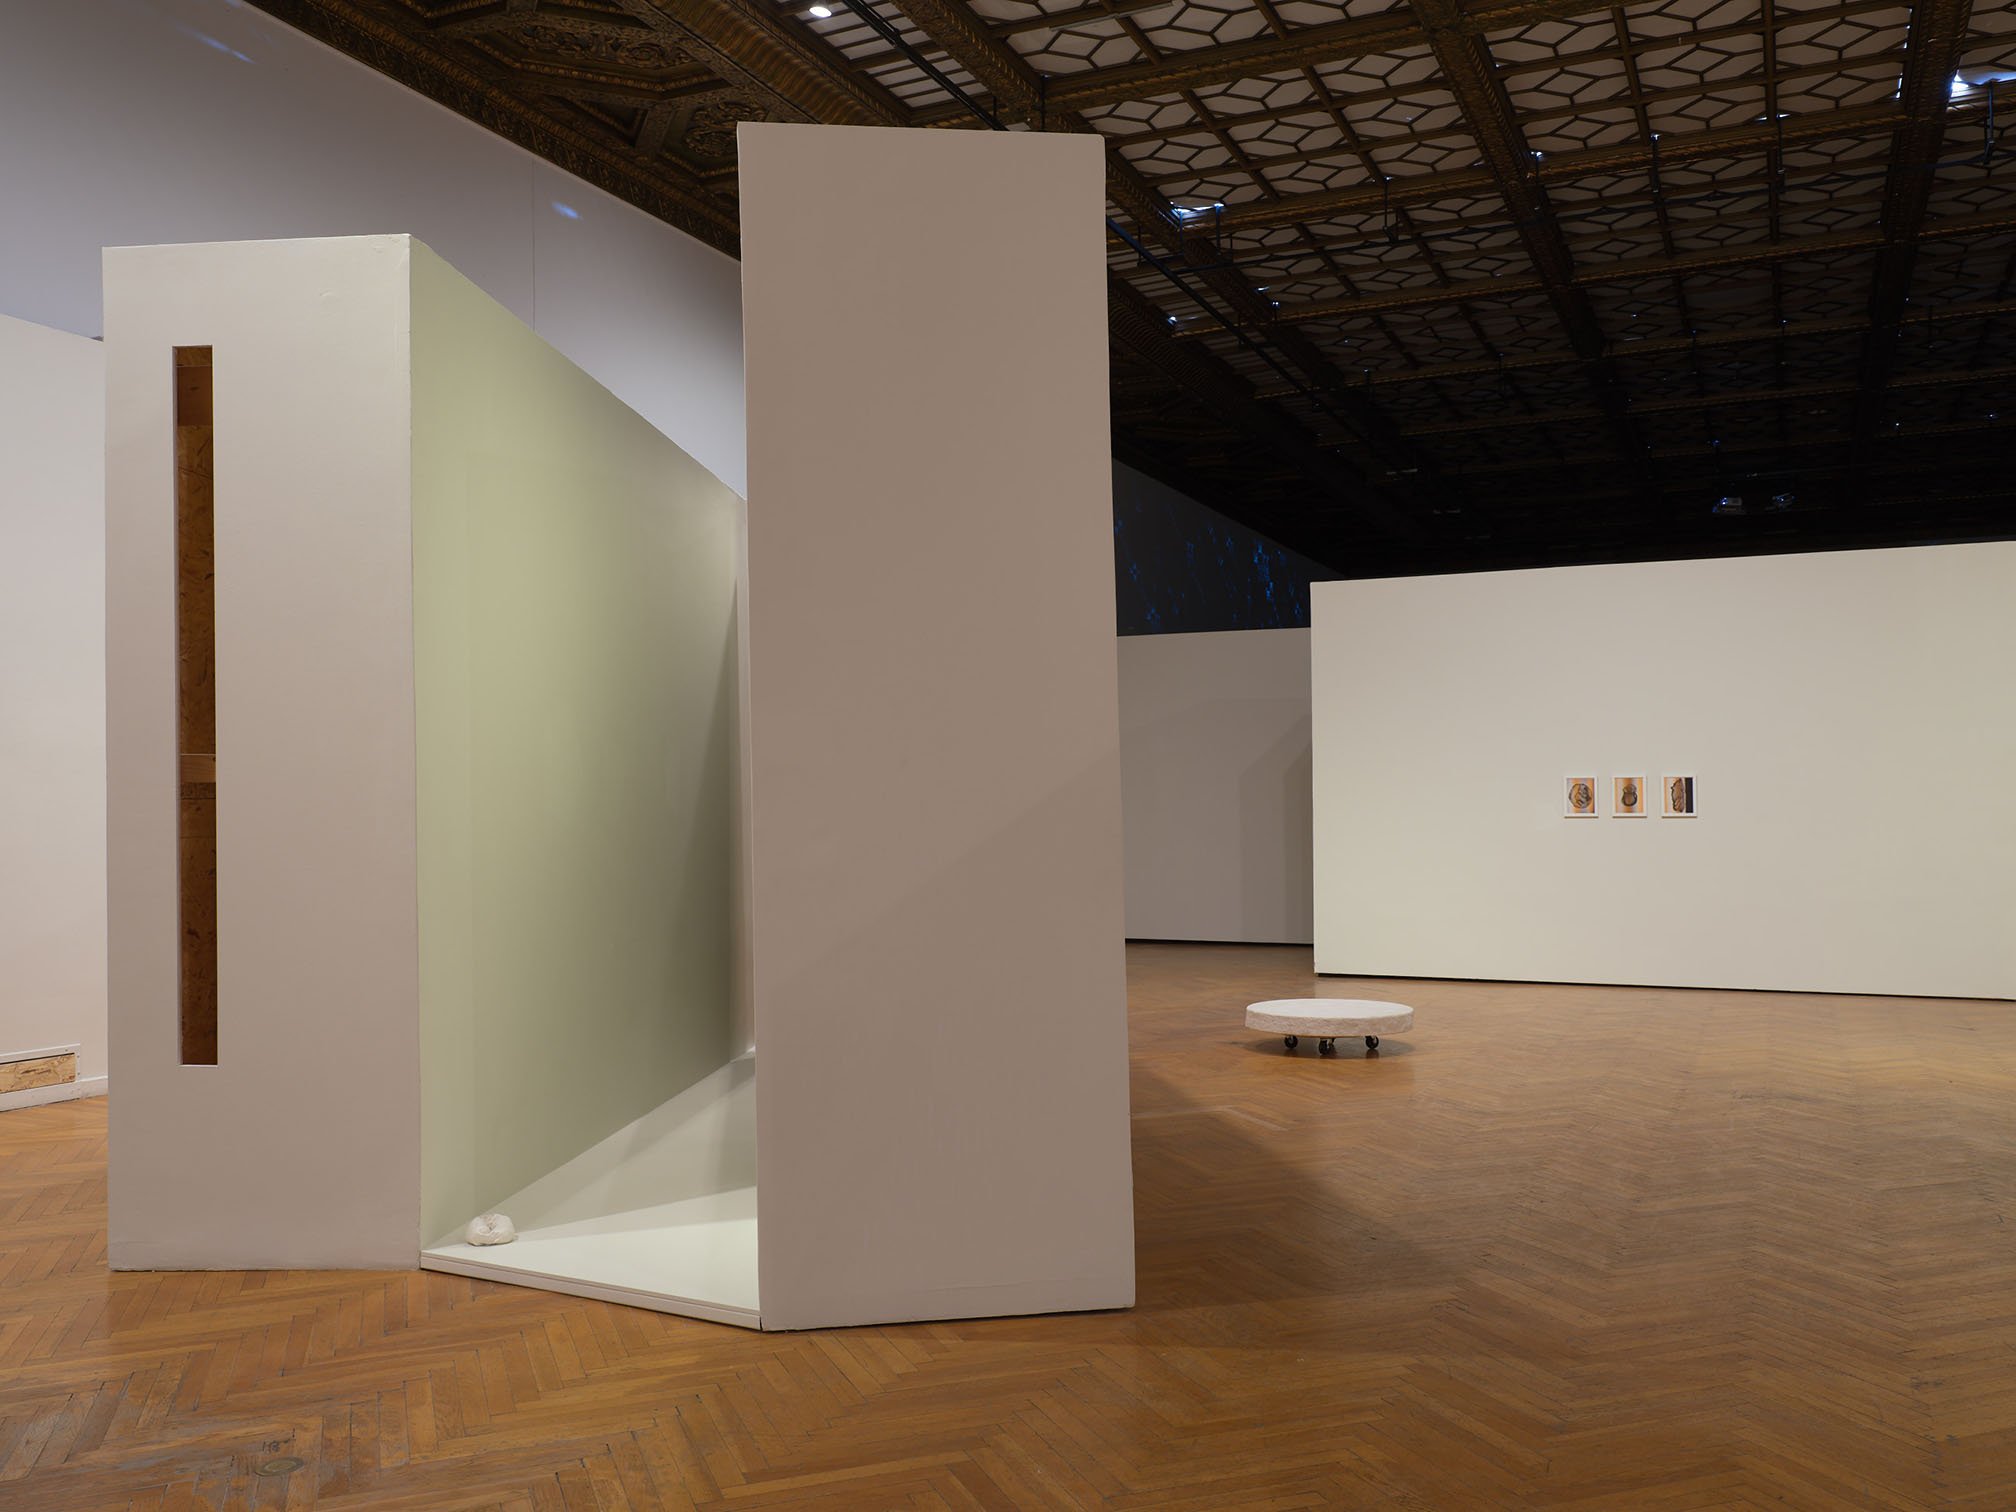   Into The Matter , installation view, 2018, altered moveable museum walls cut and joined, latex paint, MDF,  lumber, OSB sheathing, porcelain tube sock, hydrocal gypsum cement, muslin, foam, wood, casters, color laser prints. Photo credit: Phil Bond